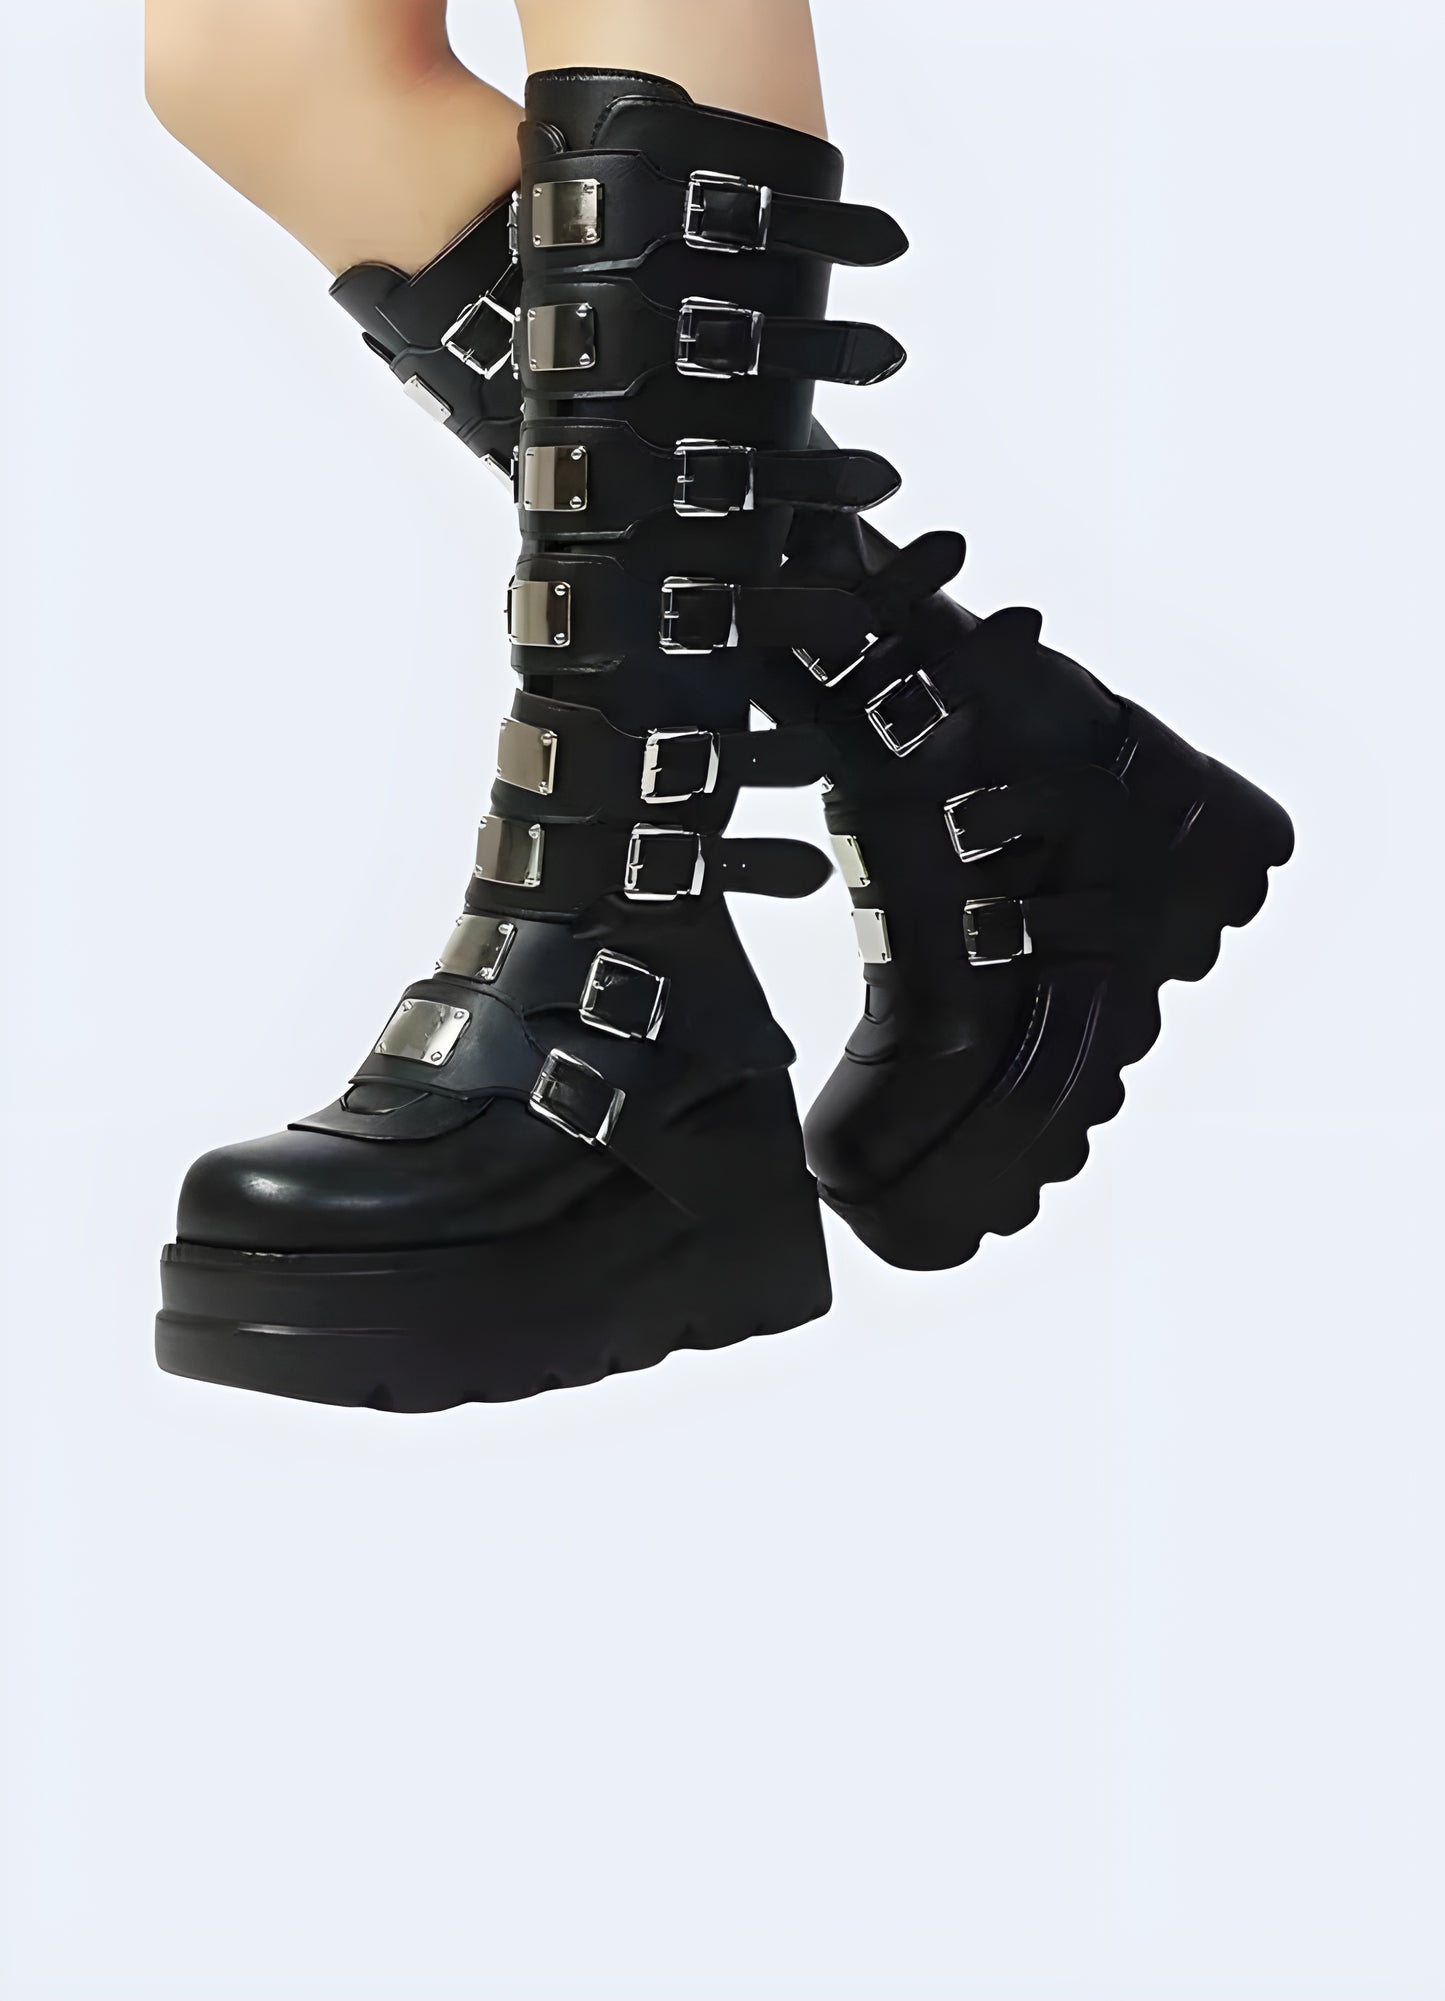 Goth buckle boots apart is their unique, eye-catching buckle features multiple buckles.